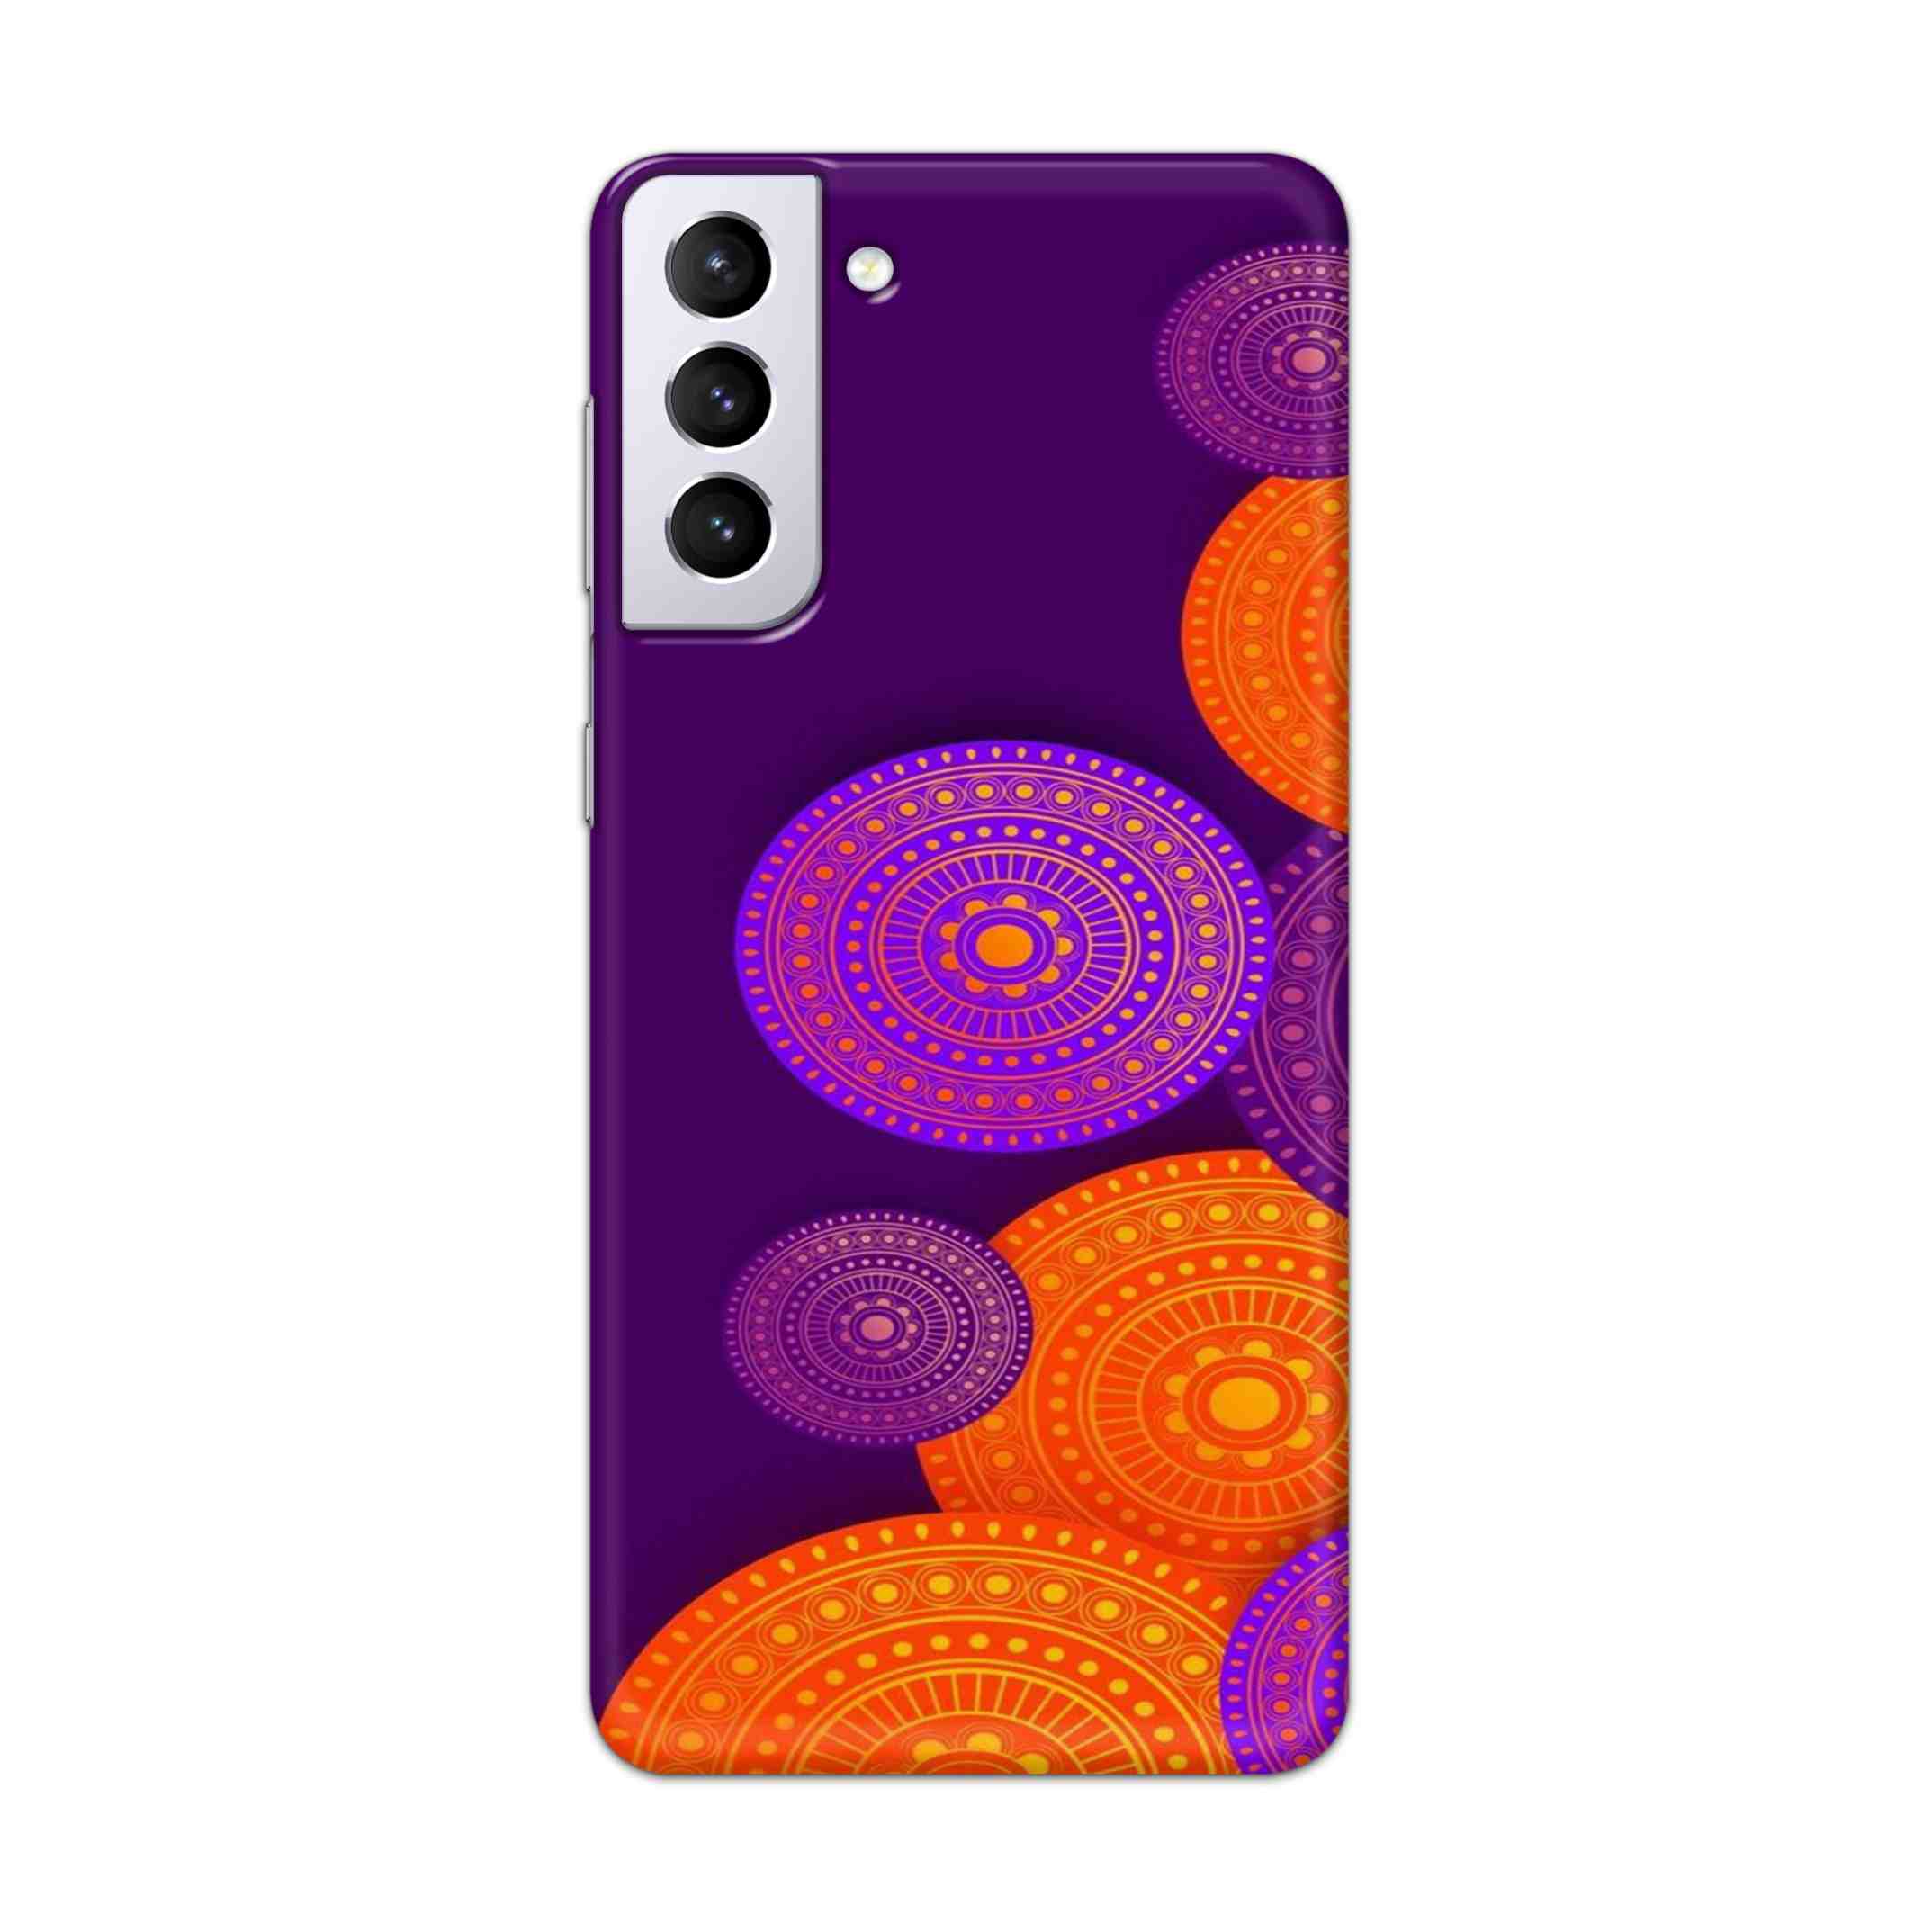 Buy Sand Mandalas Hard Back Mobile Phone Case Cover For Samsung Galaxy S21 Plus Online